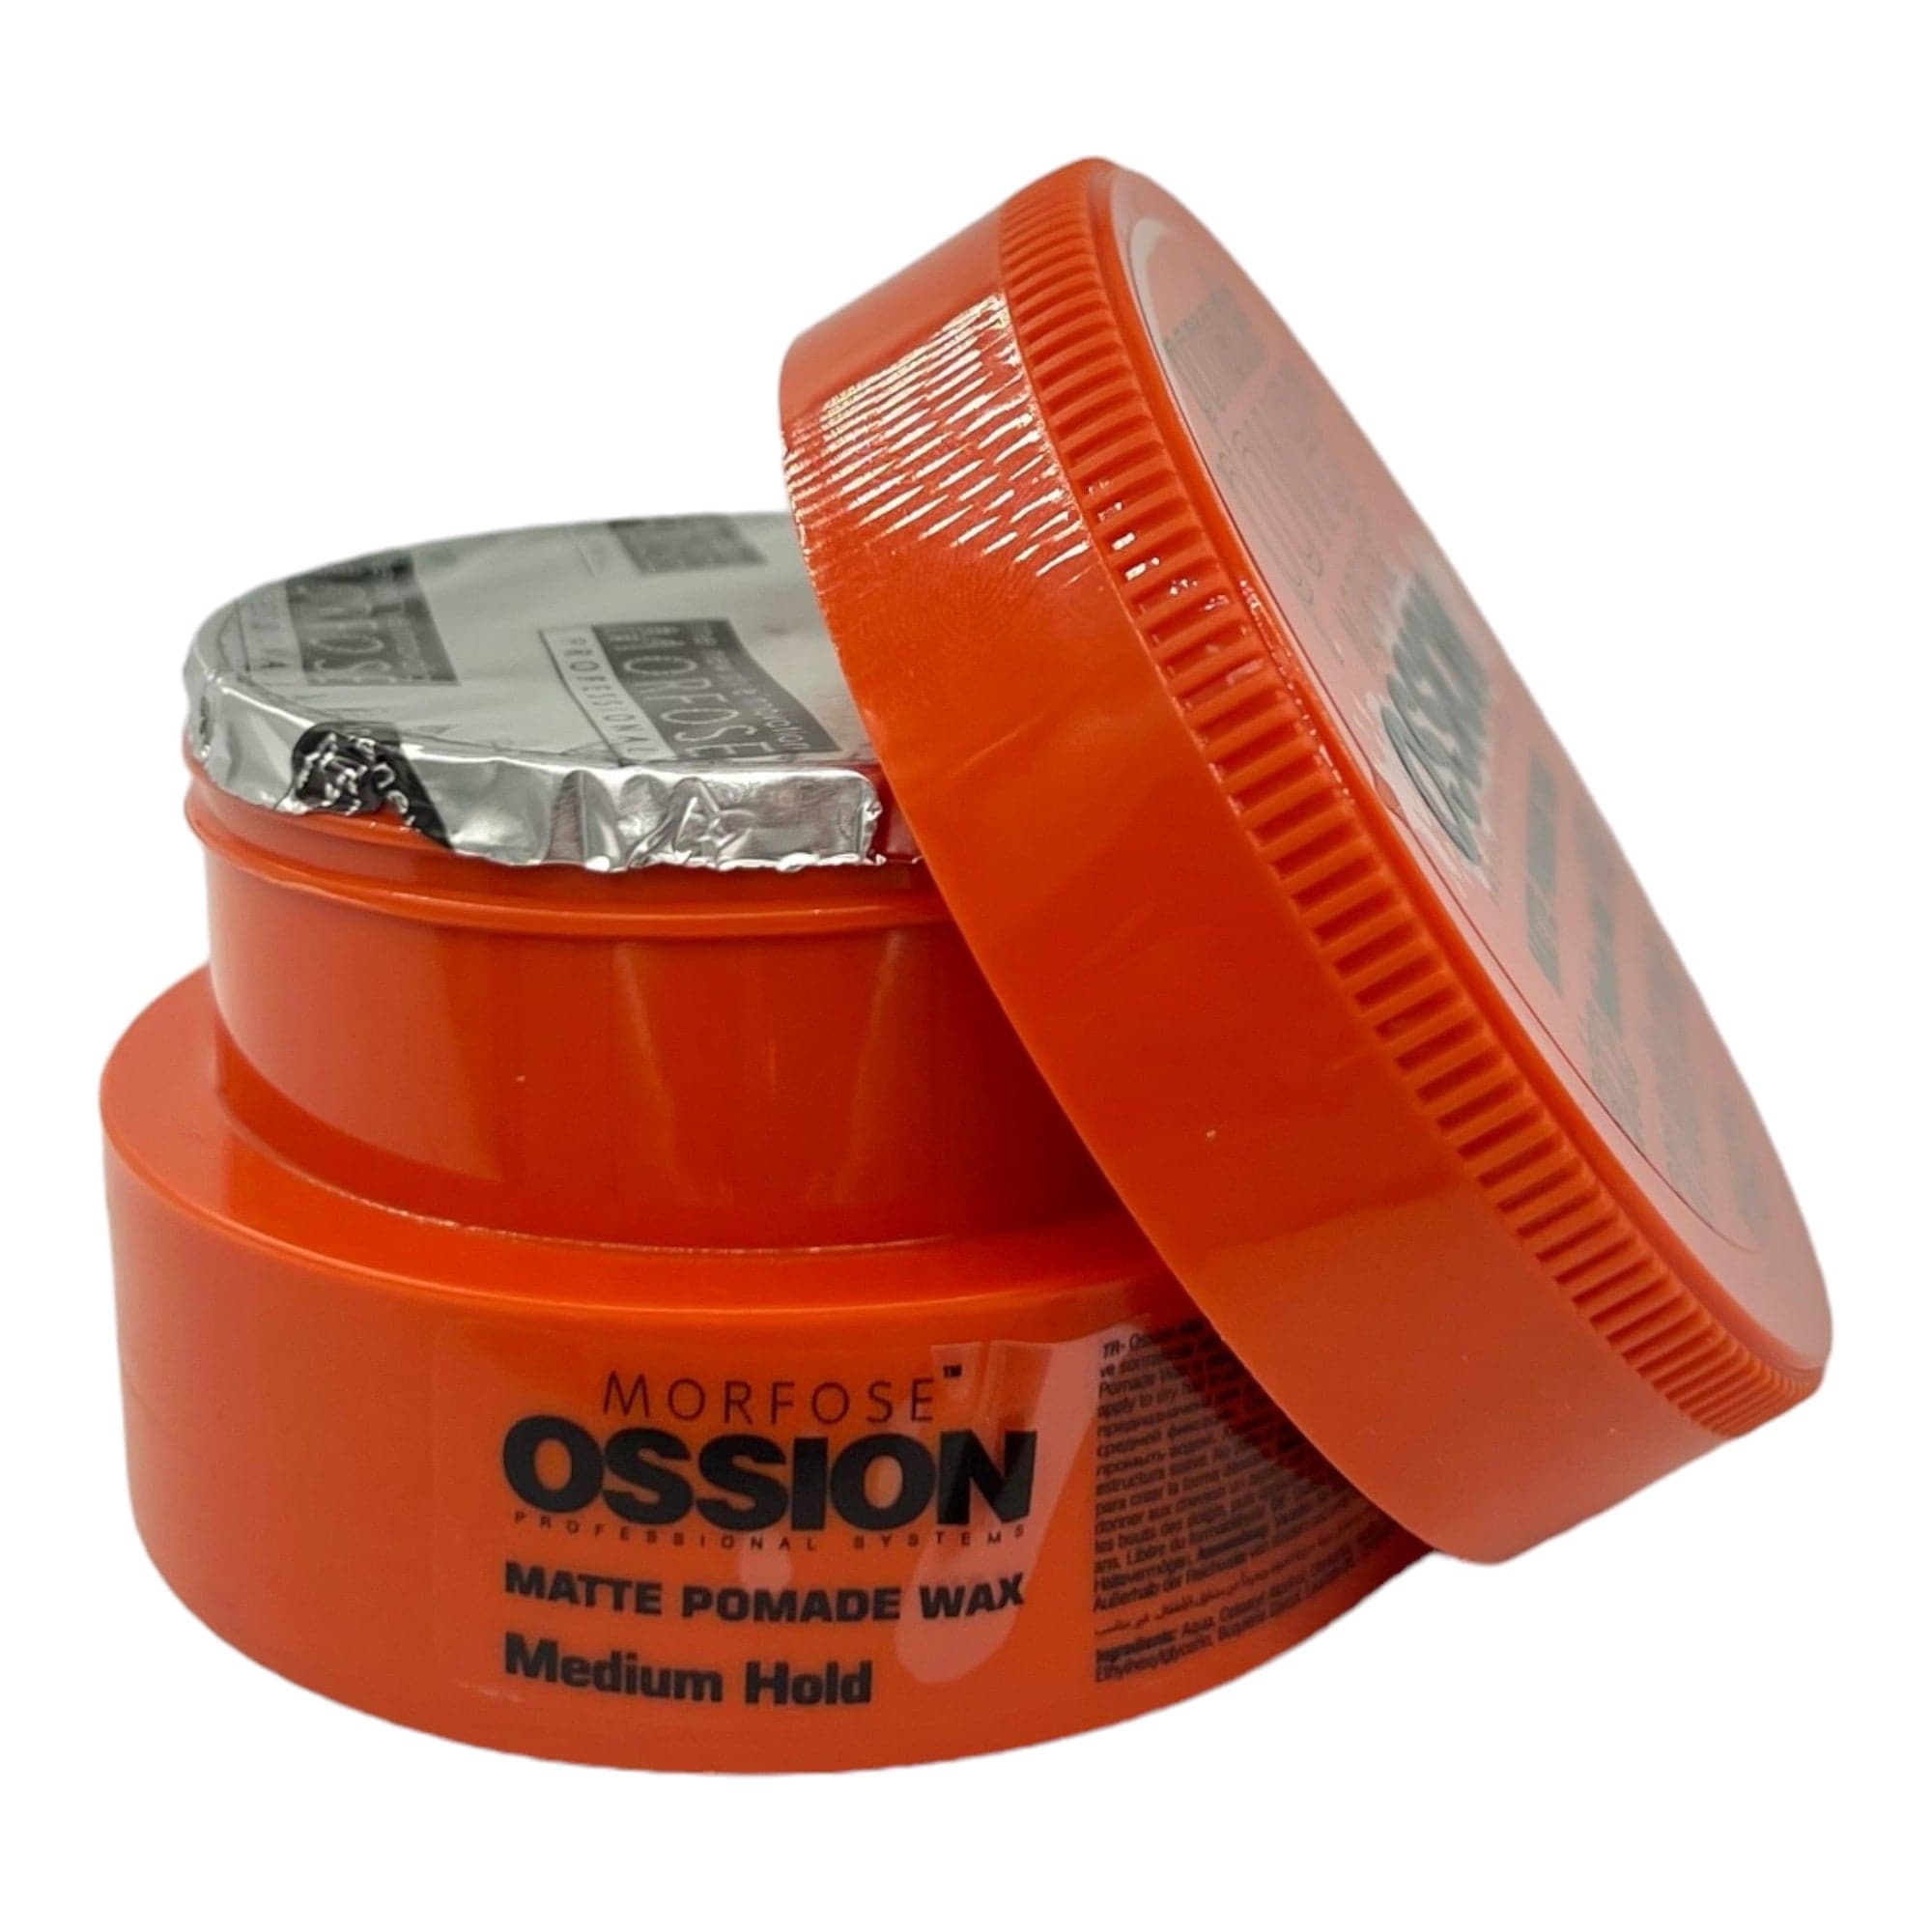 Morfose - Ossion Matte Pomade Wax 100ml